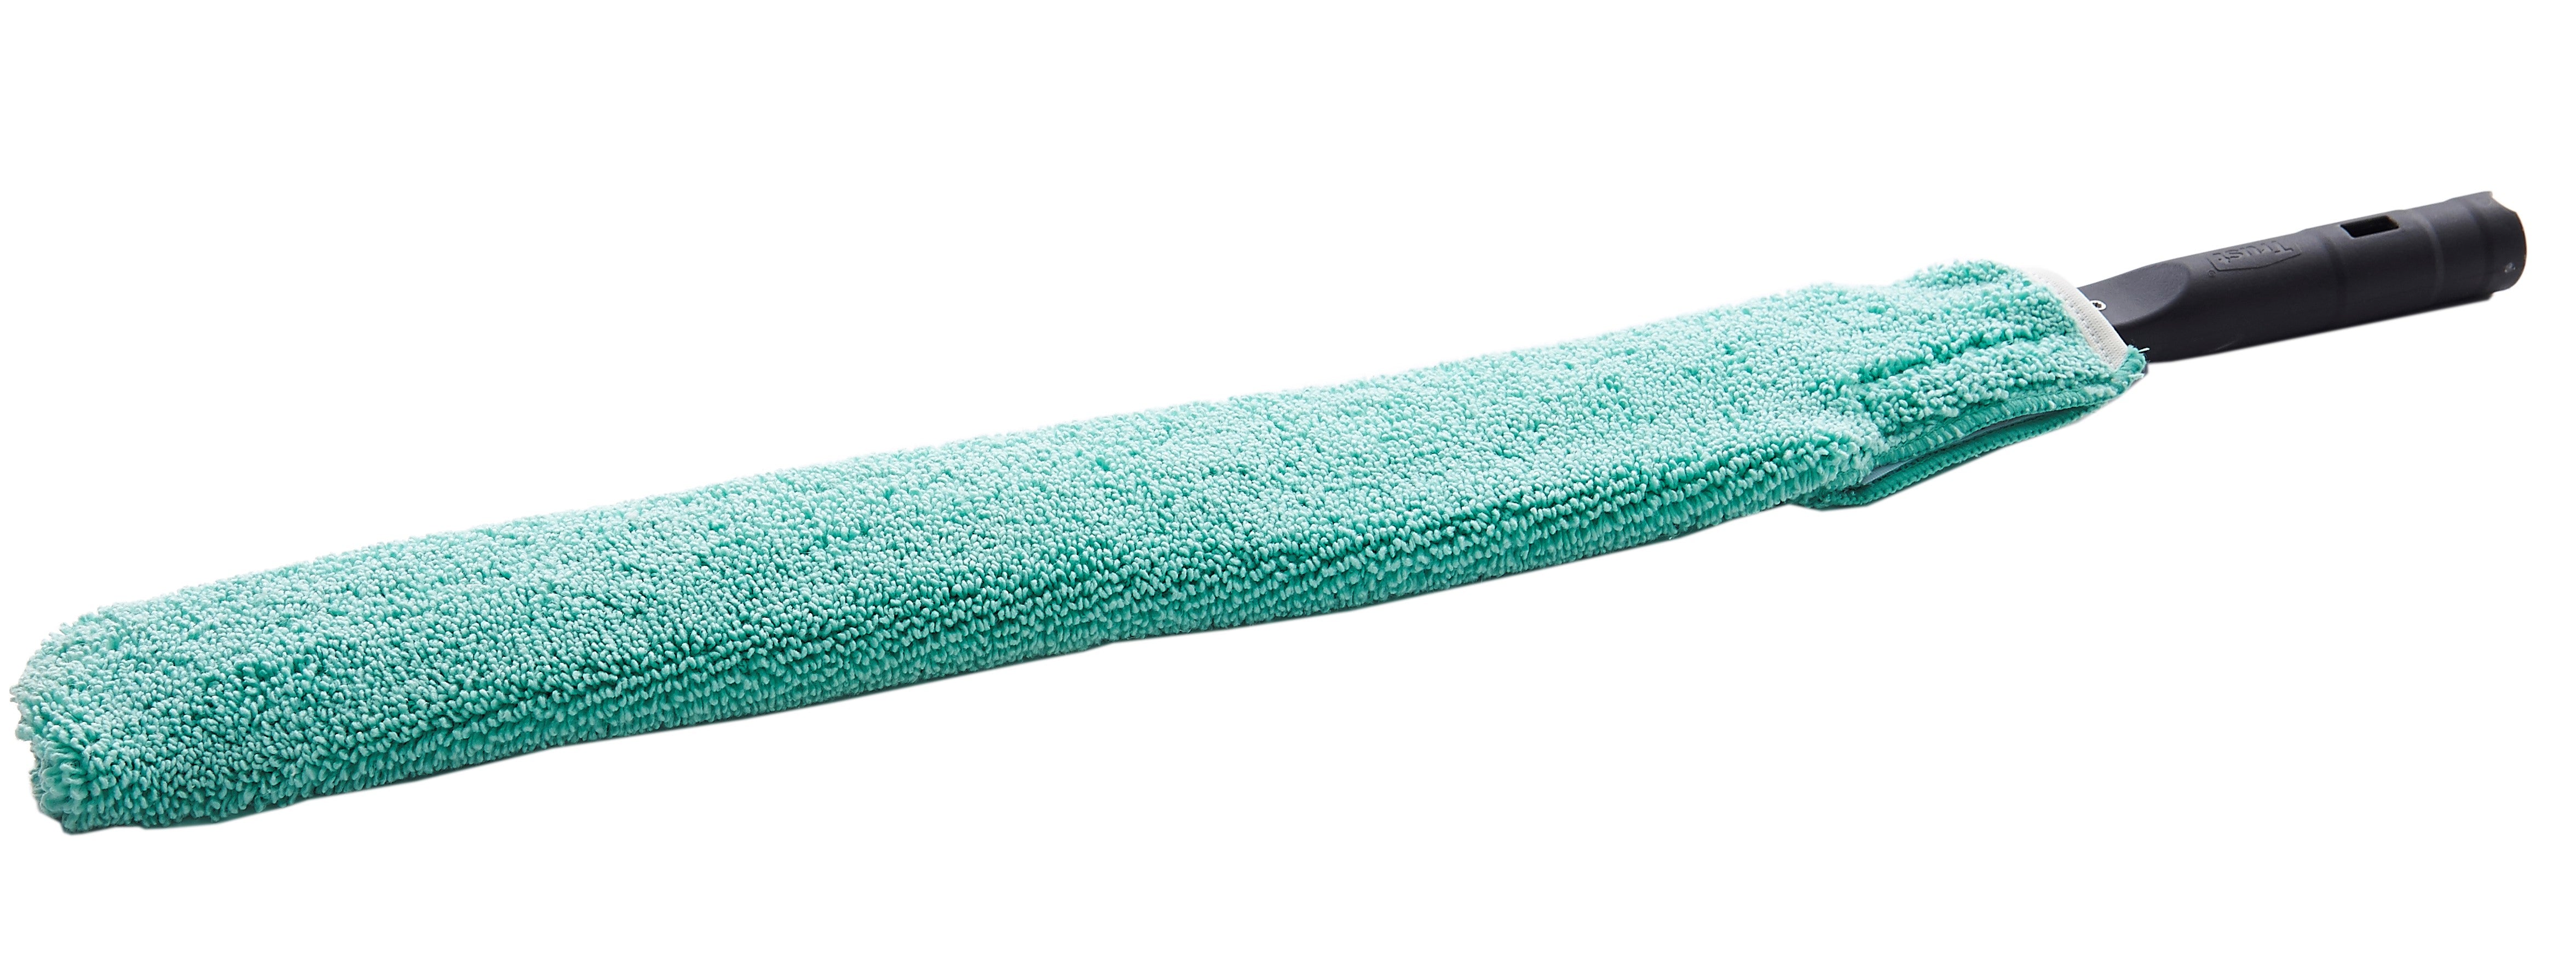 TRUST U-RAG Quick-Connect Flexible Dusting Wand with Microfiber Sleeve - Green